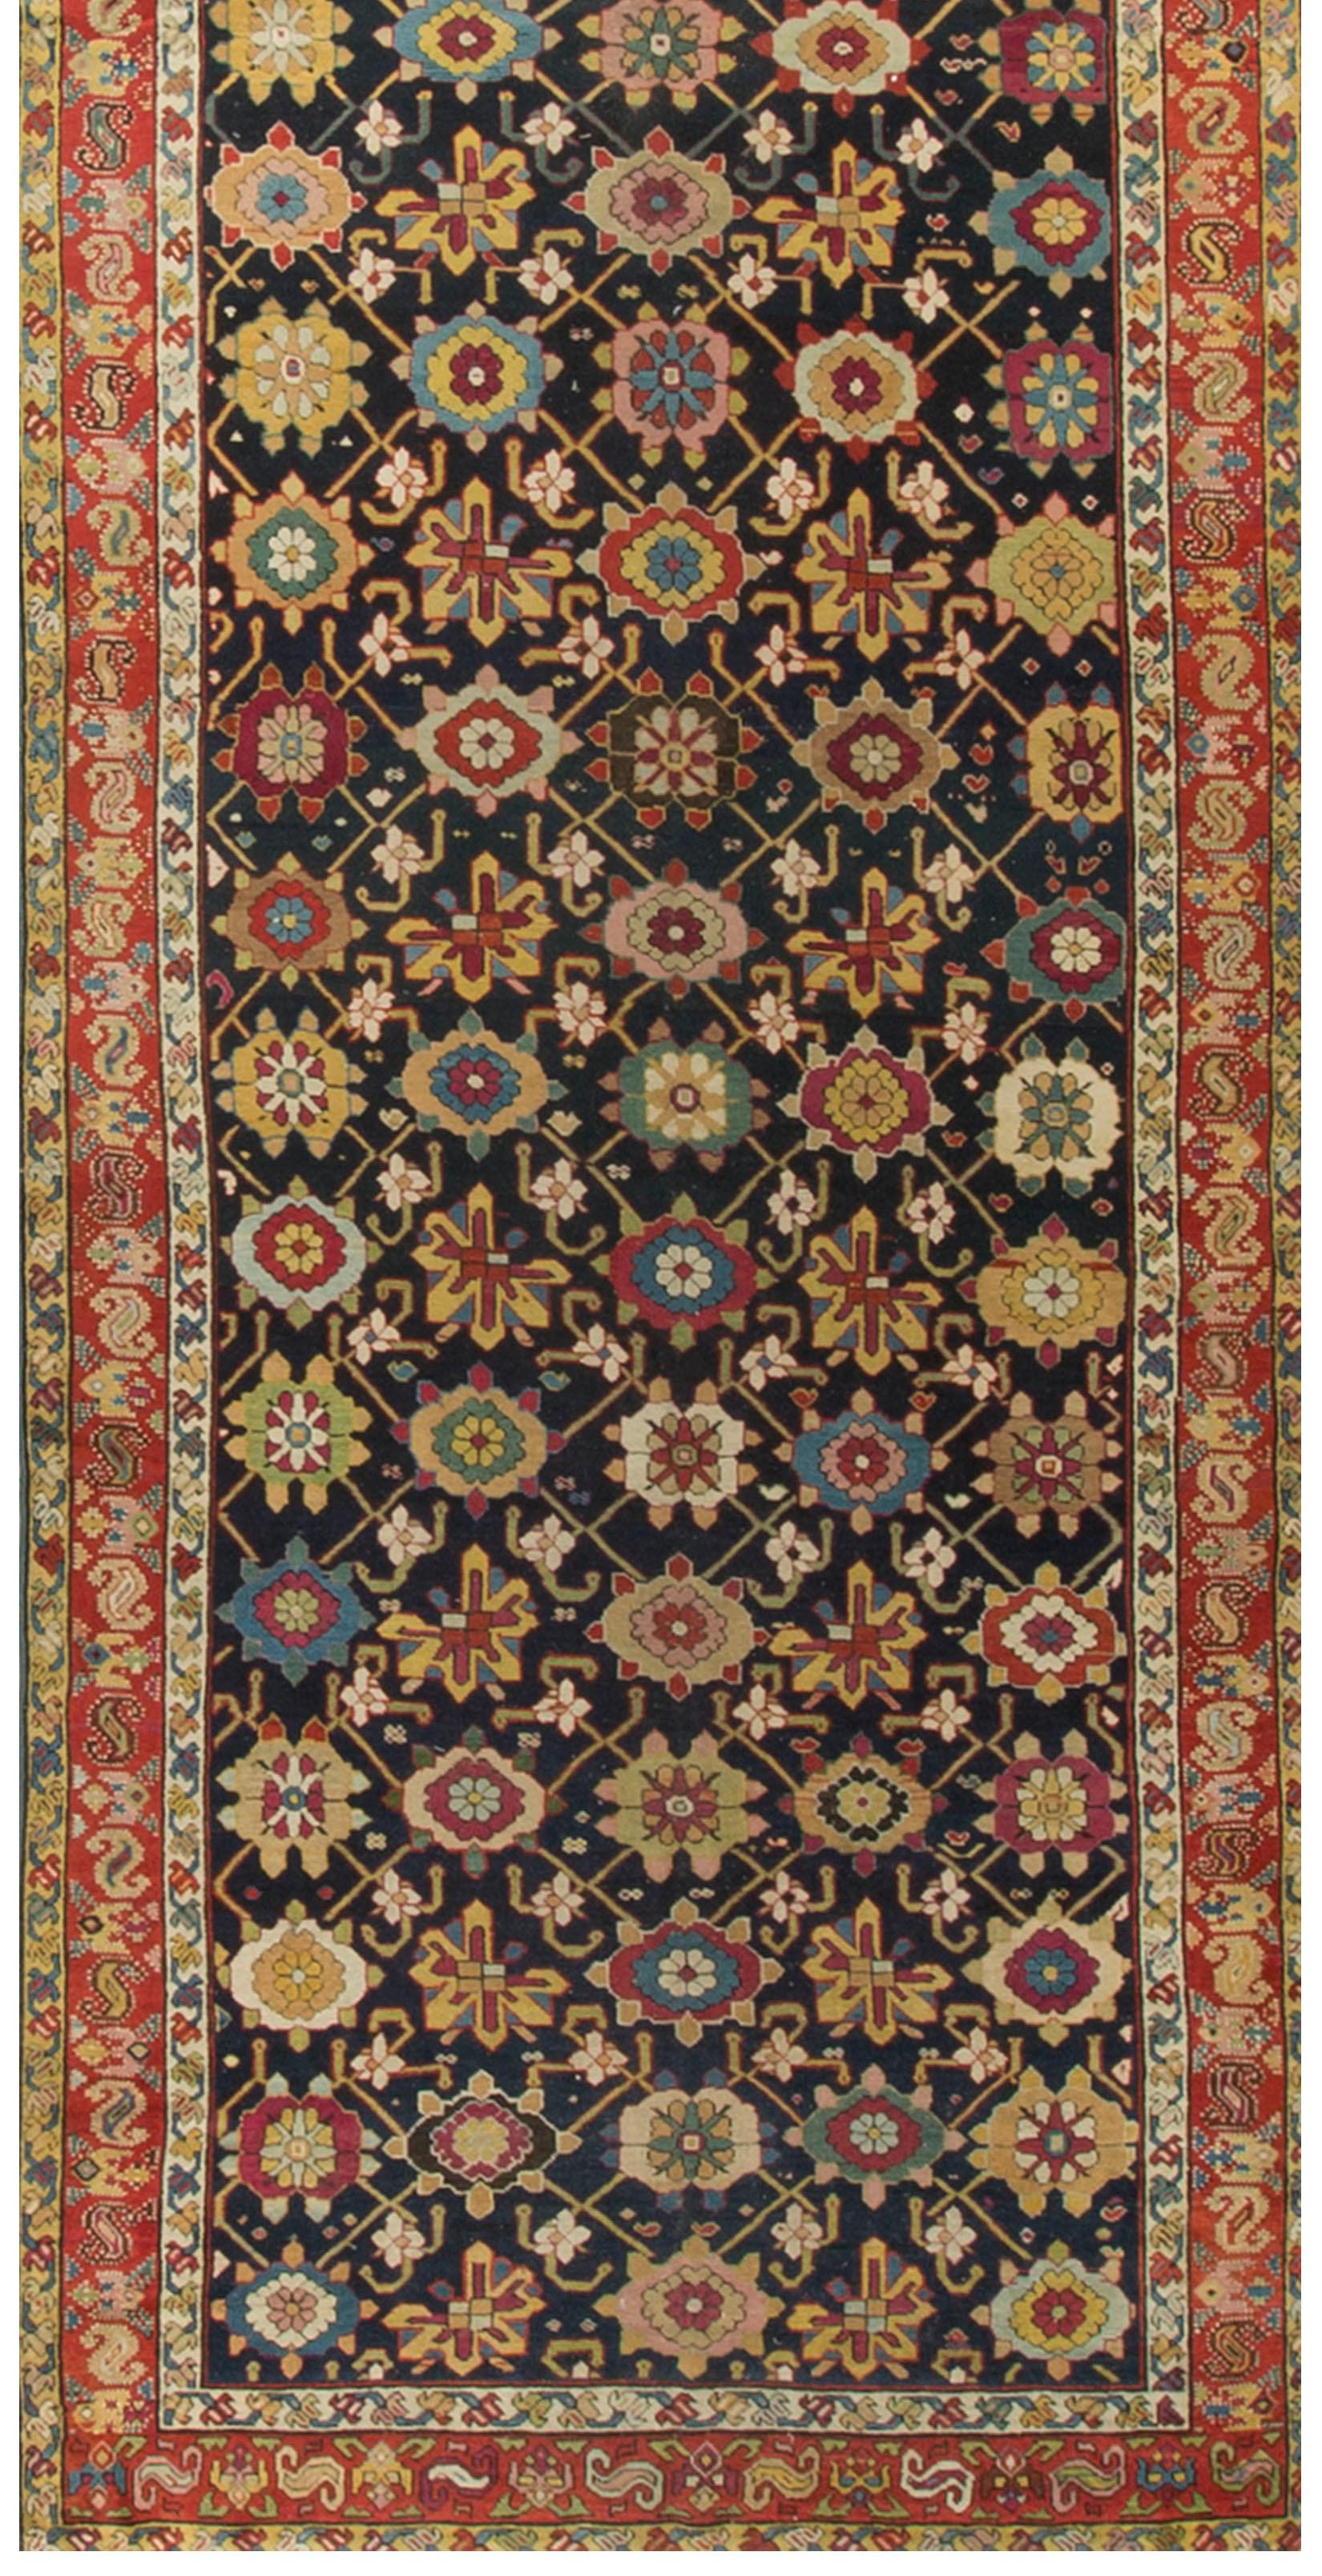 Caucasian Karabagh rug runner, circa 1900. Across the Aras river from Karajeh is the Armenian Caucasian rug area of Karabagh (Black Garden) which wove scatters, runners and gallery rugs from the 17th century onwards, often with cochineal reds and